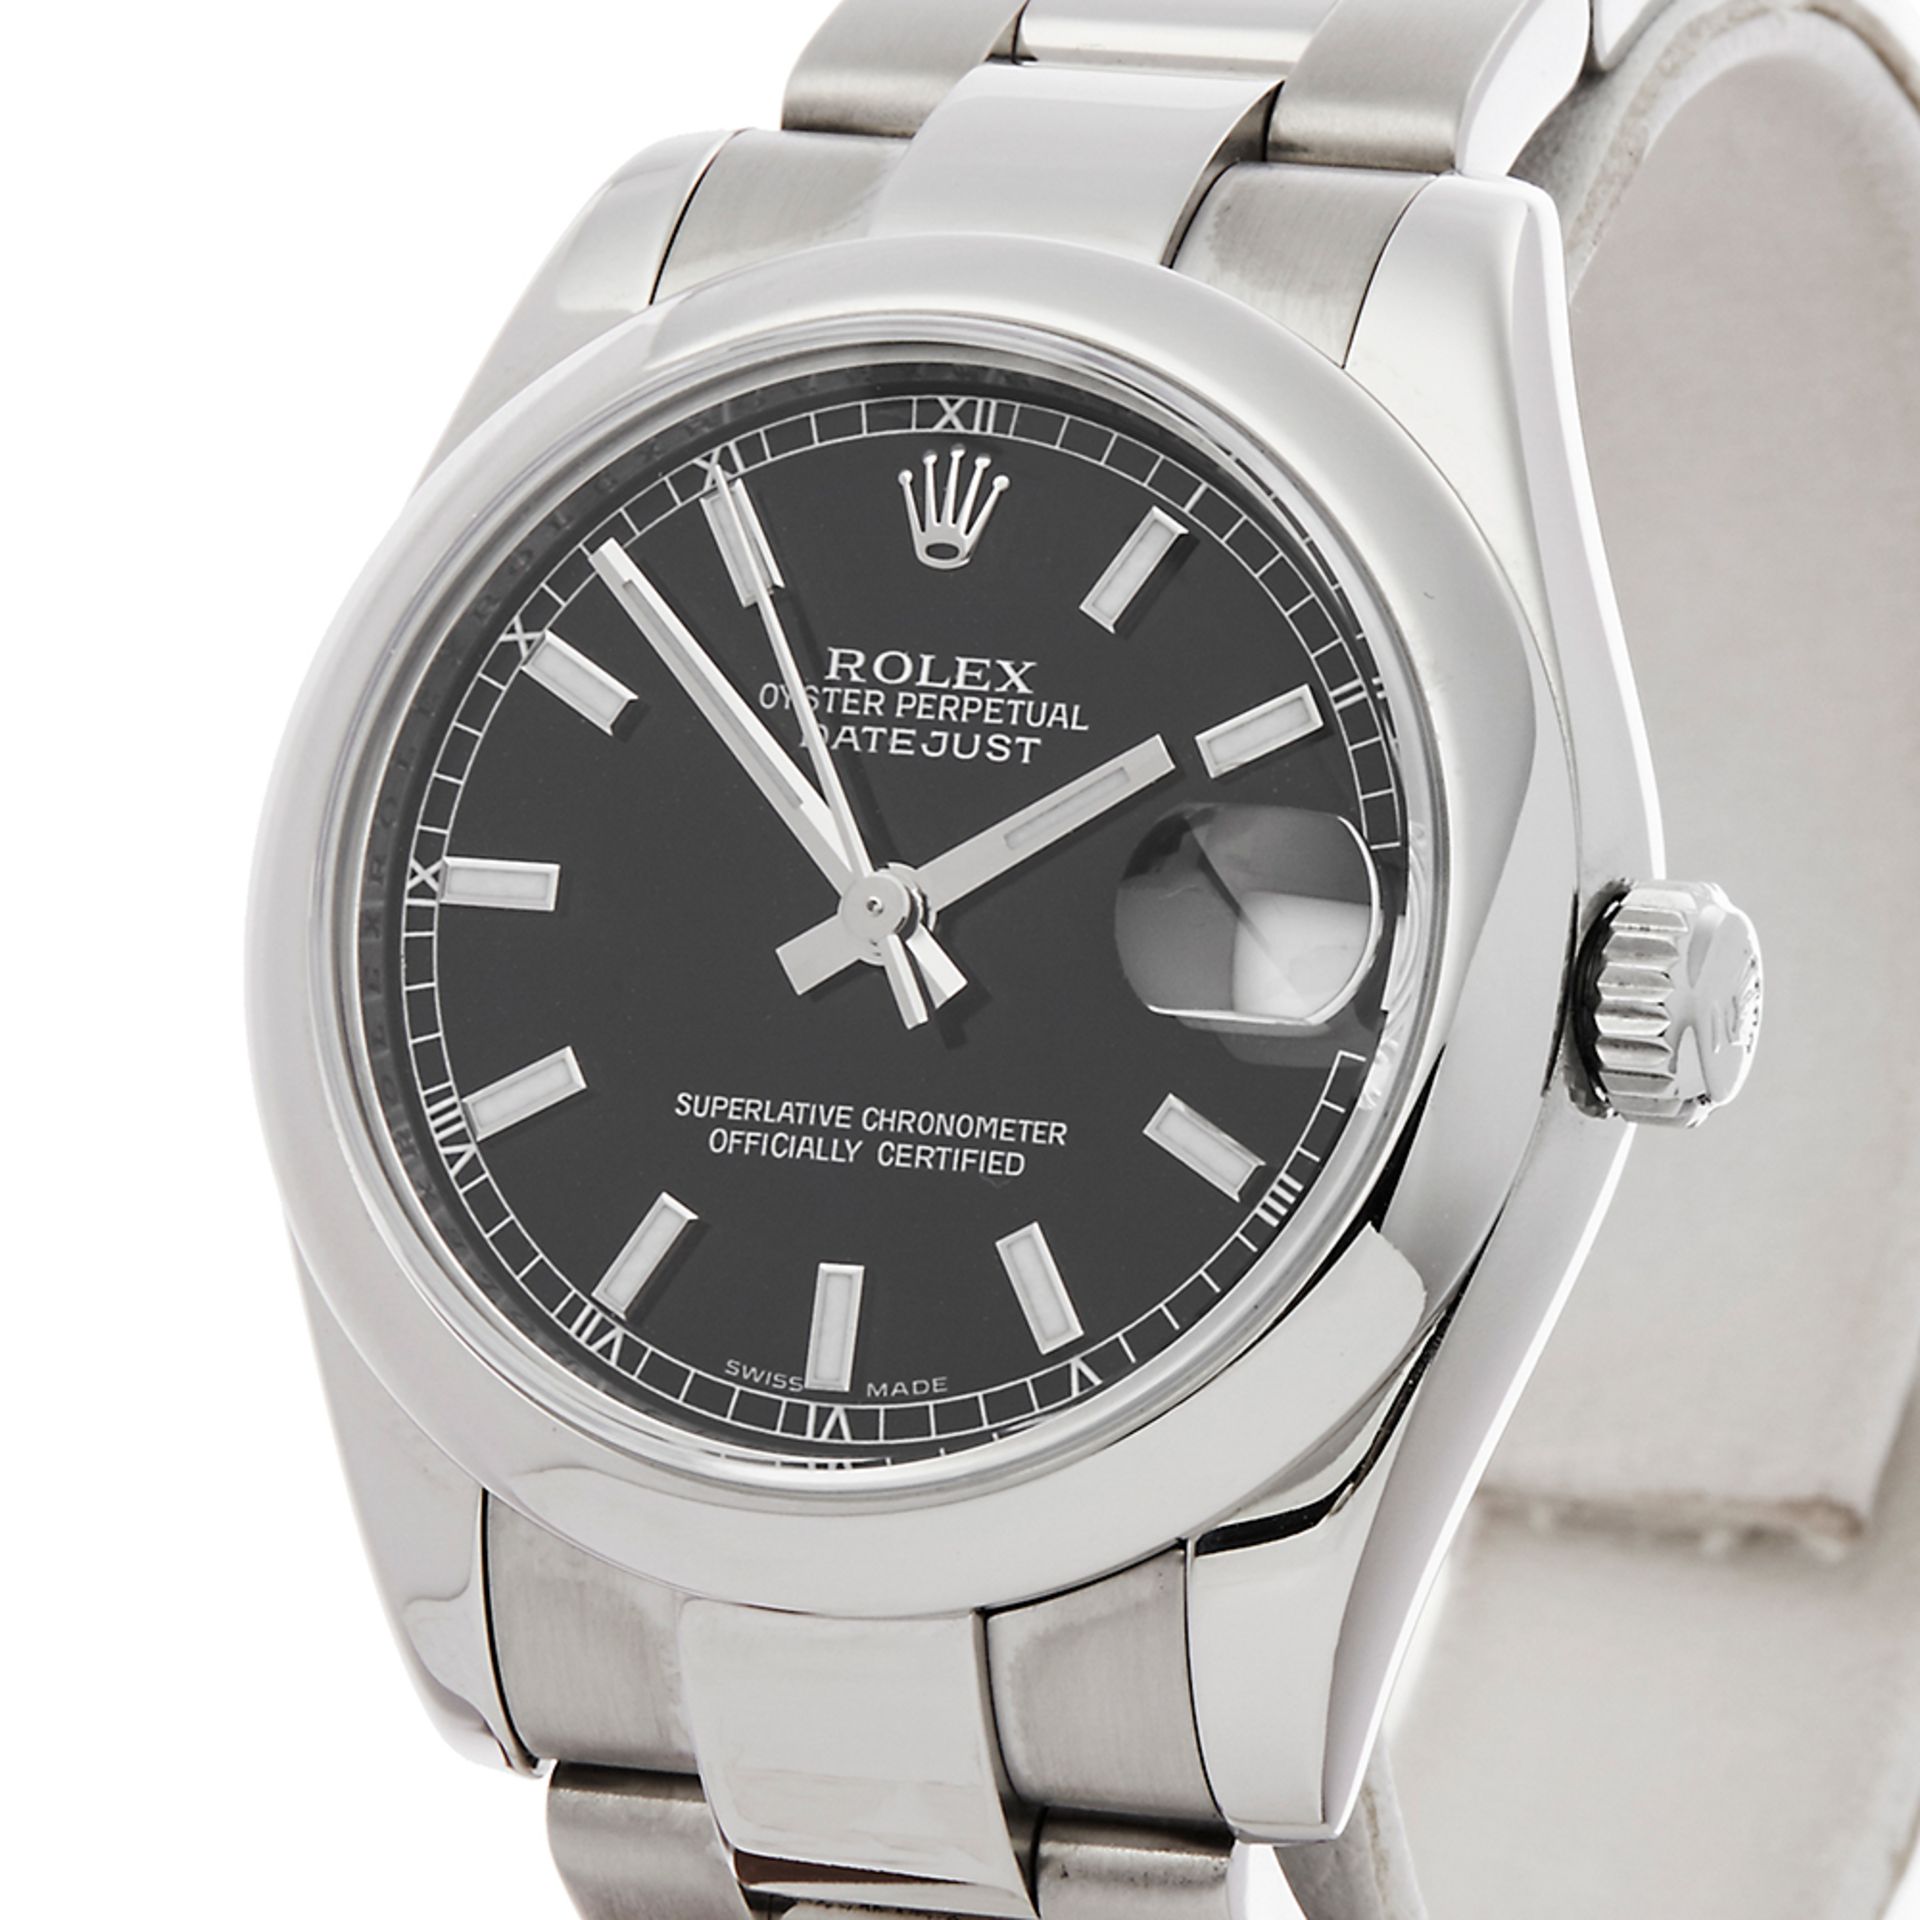 Rolex Datejust 31mm Stainless Steel - 178240 - Image 3 of 7